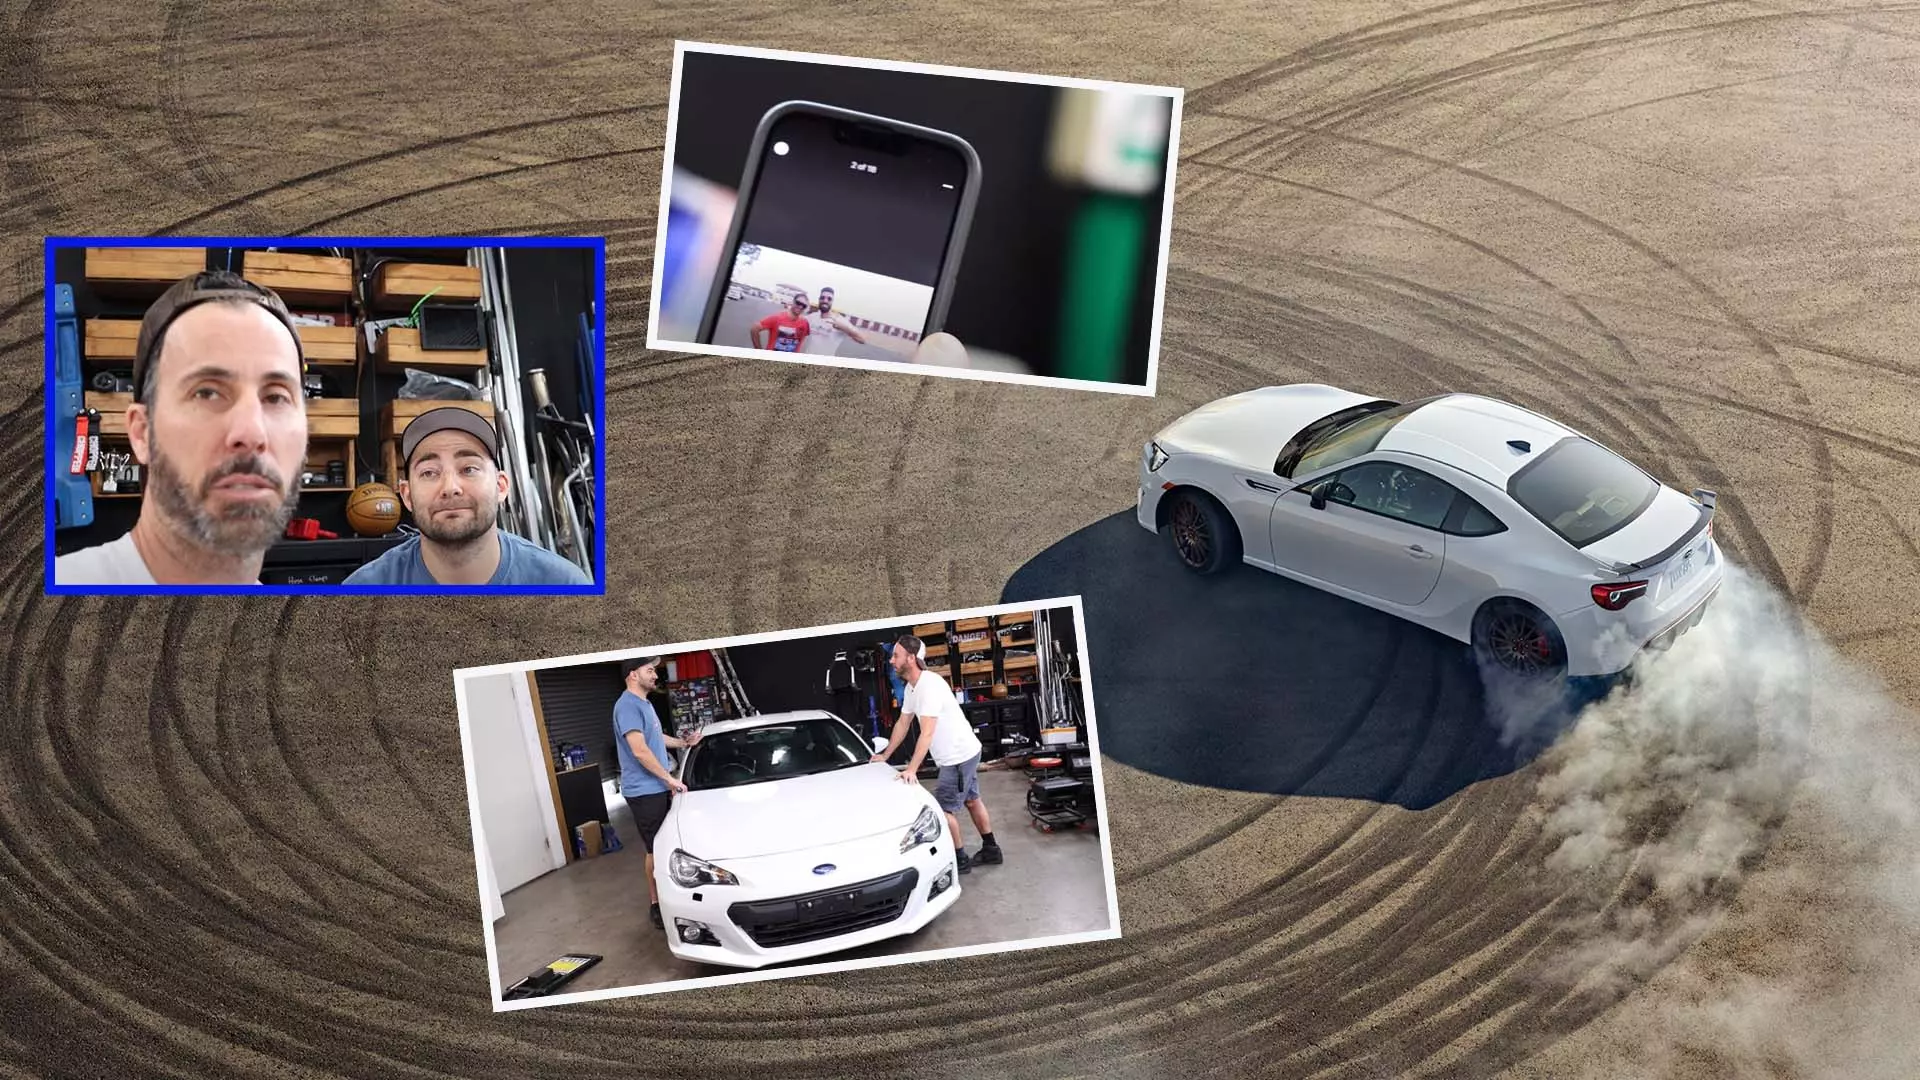 Finding This Subaru BRZ’s Backstory Was Reminiscent of True Crime Sleuthing